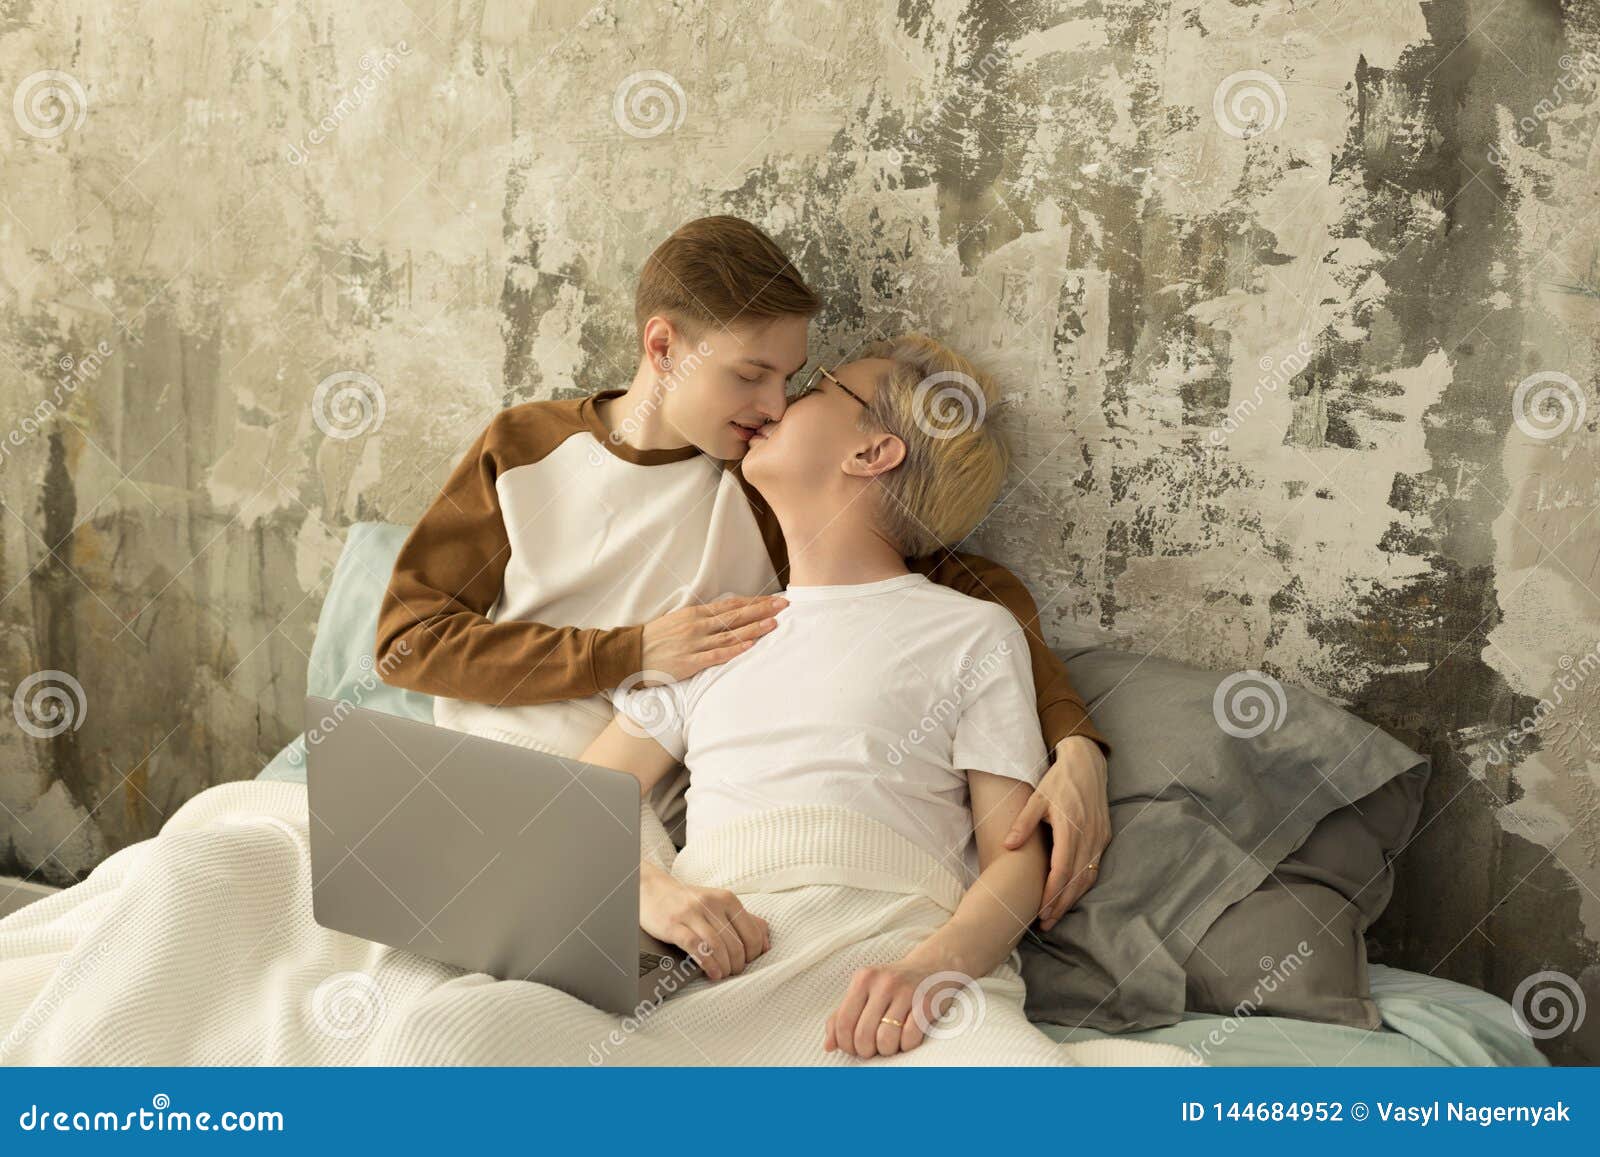 Young International Same Sex Male Couple Spending Time Together in One Bed Watching Laptop Stock Photo pic